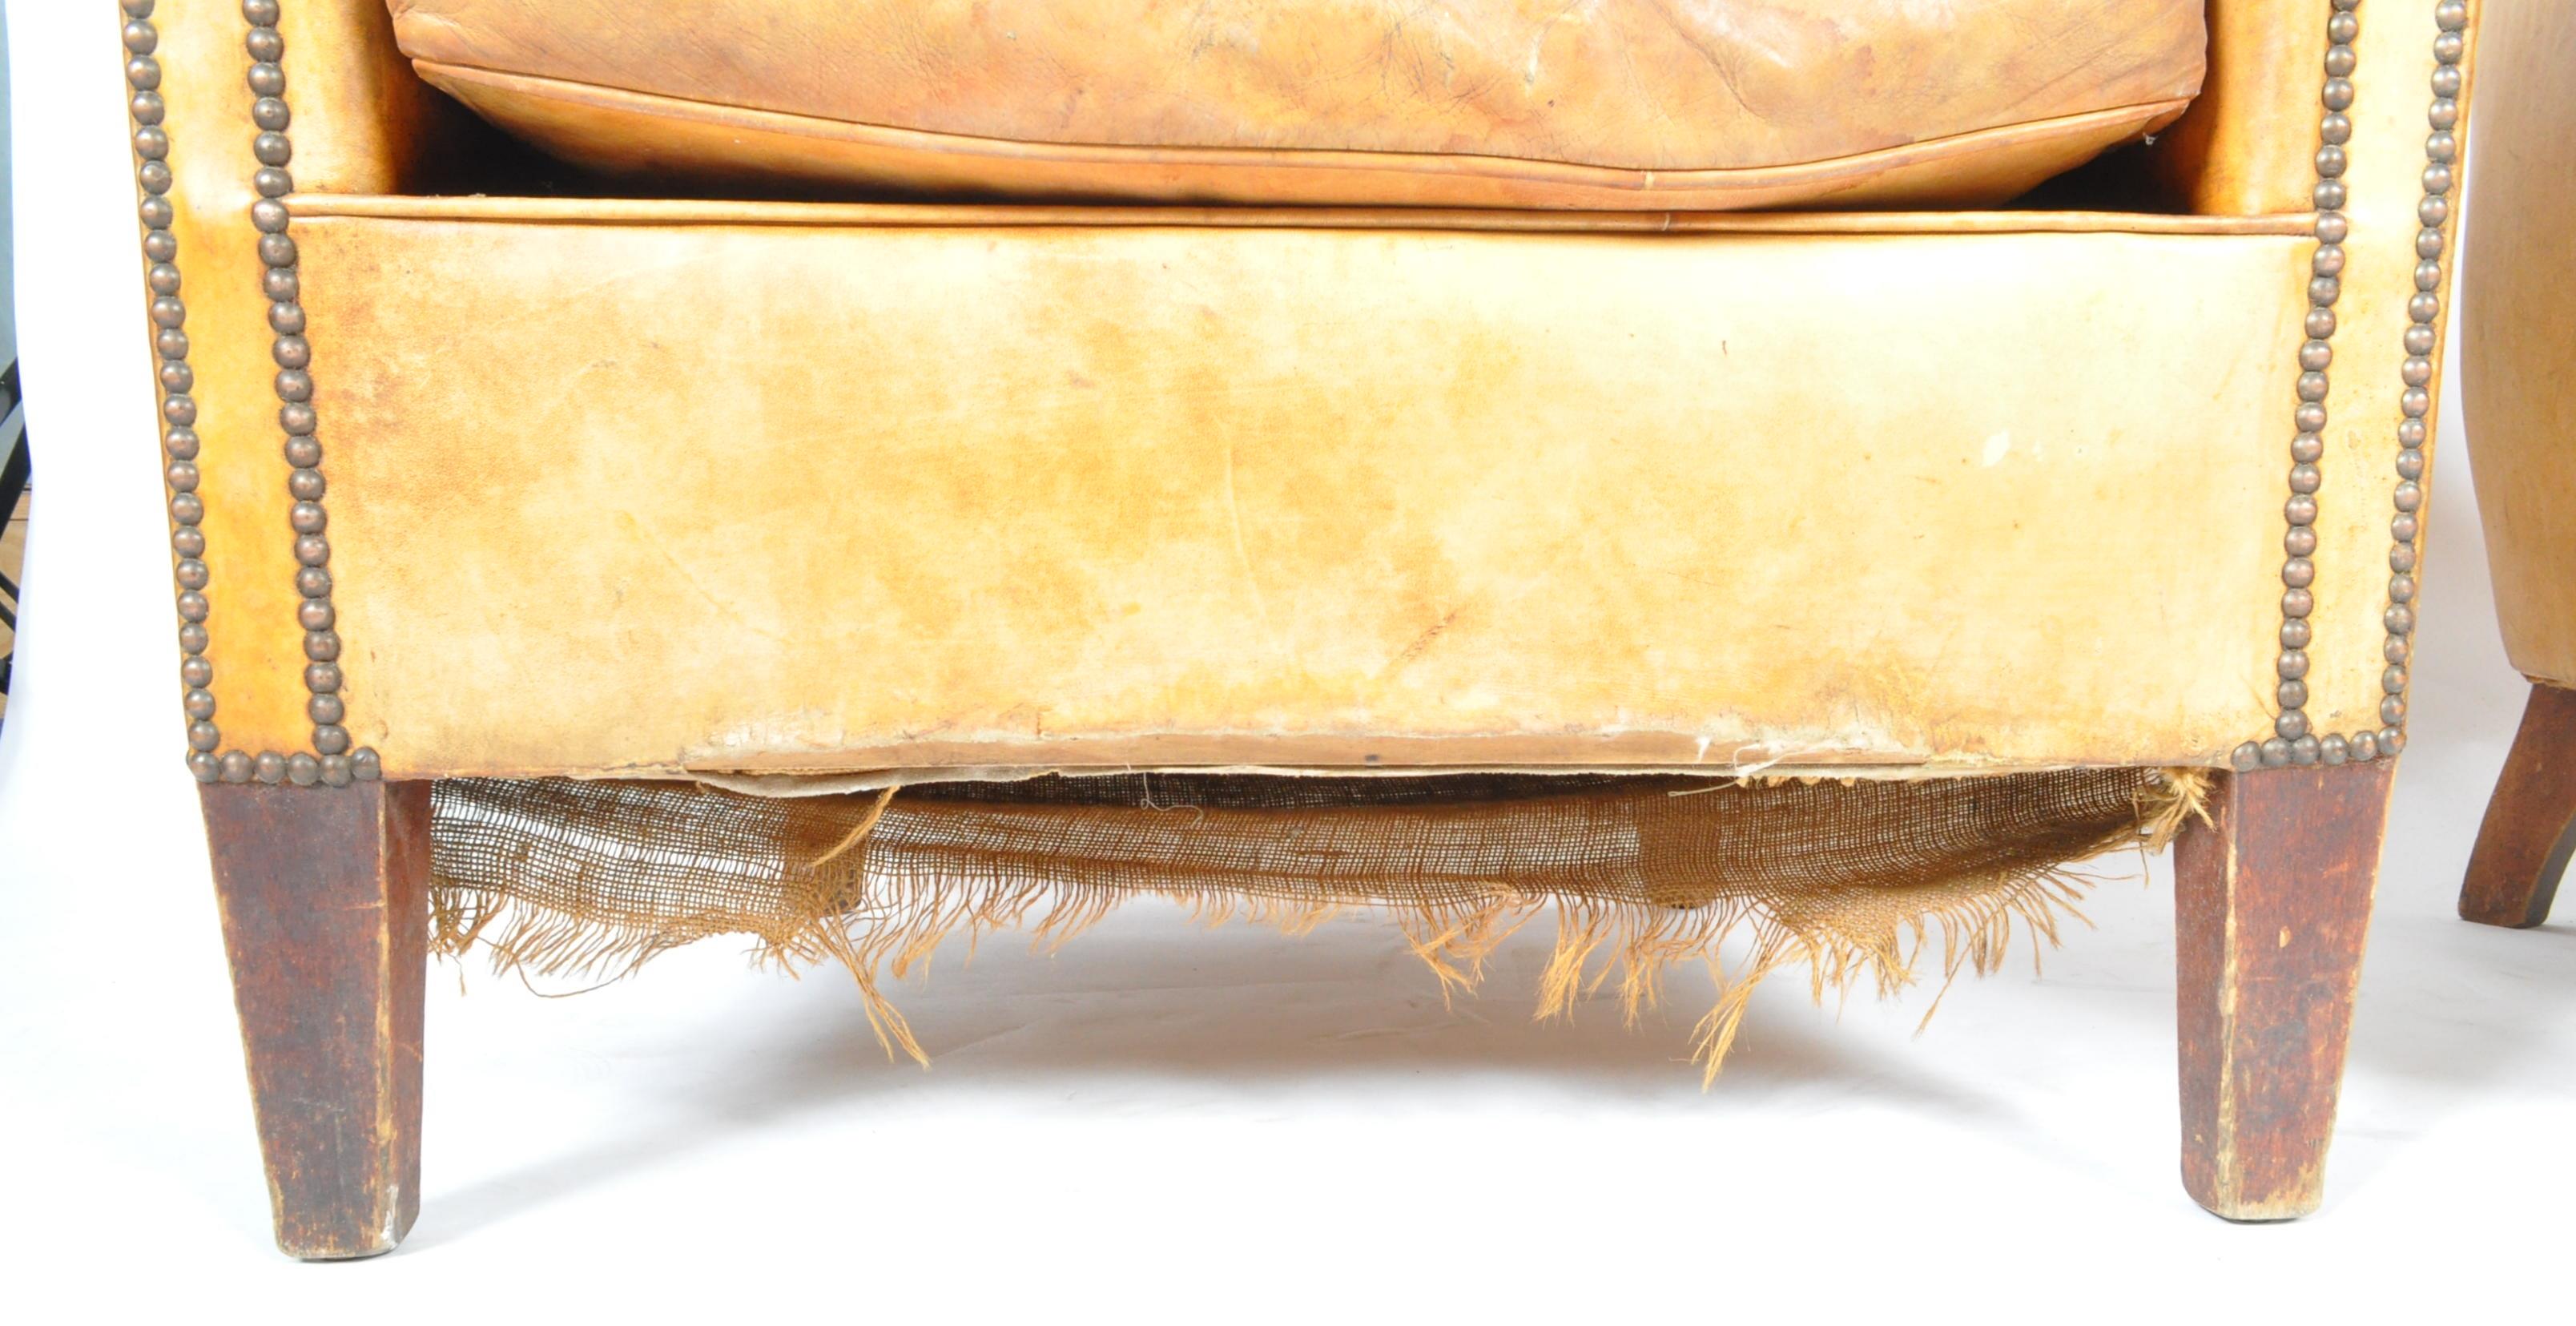 PAIR OF DUTCH SHEEPSKIN TAN BROWN LEATHER CLUB ARMCHAIRS - Image 5 of 7